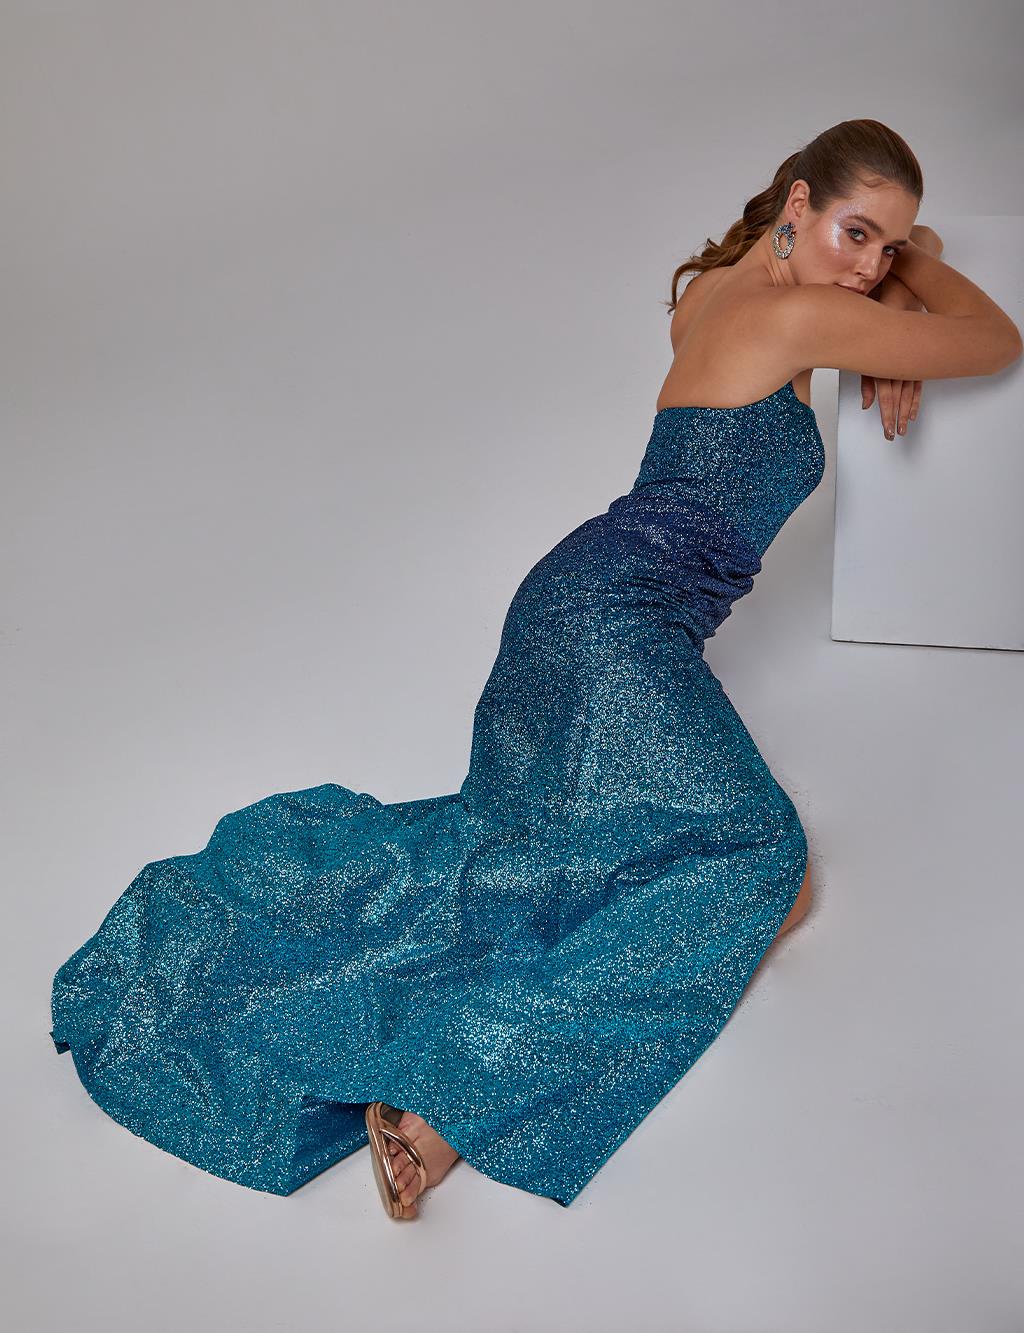 Sparkling Strapless Evening Dress Turquoise